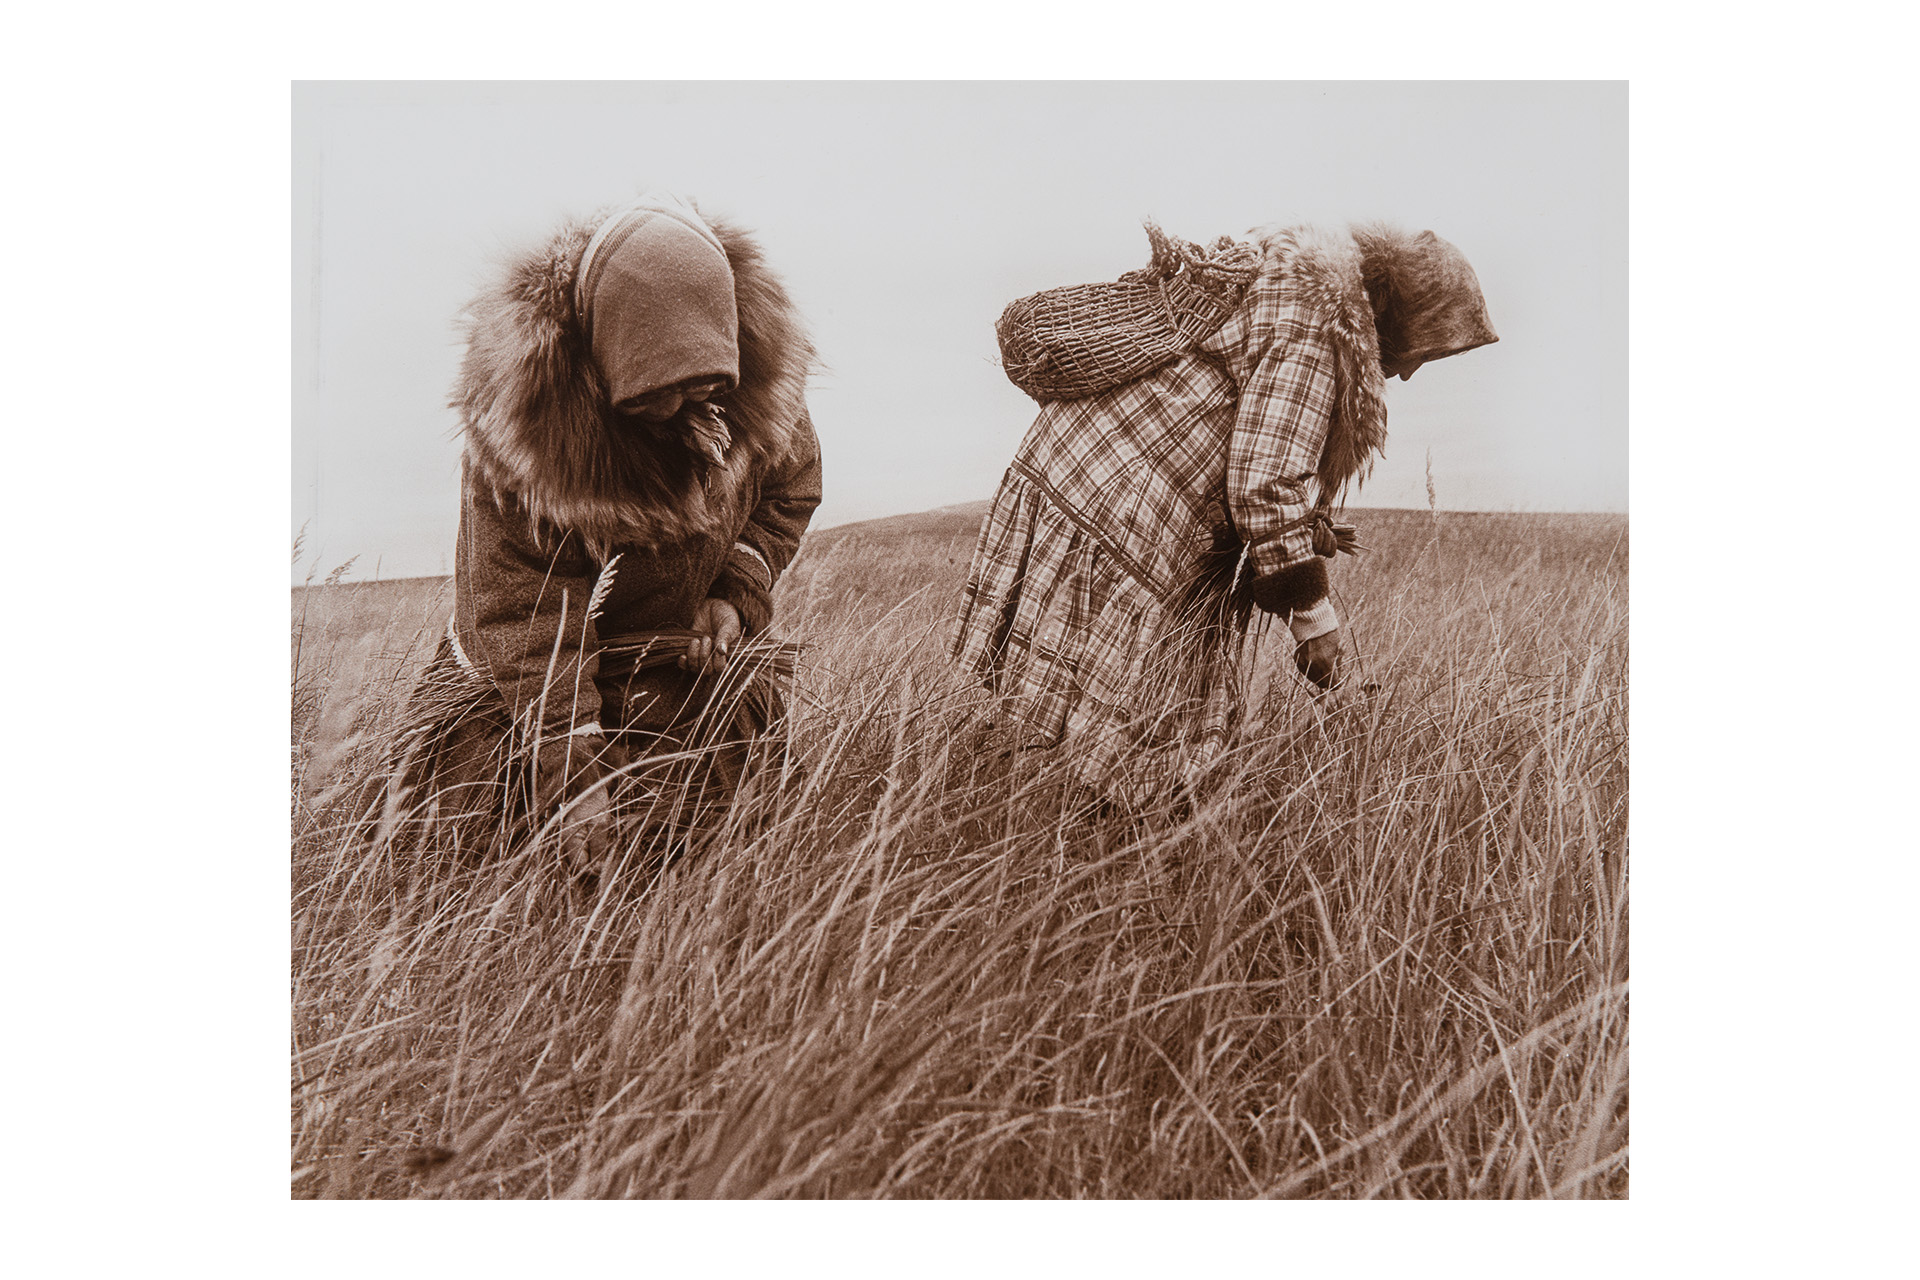 A sepia toned image of two people in a field with baskets looking down at the grass.